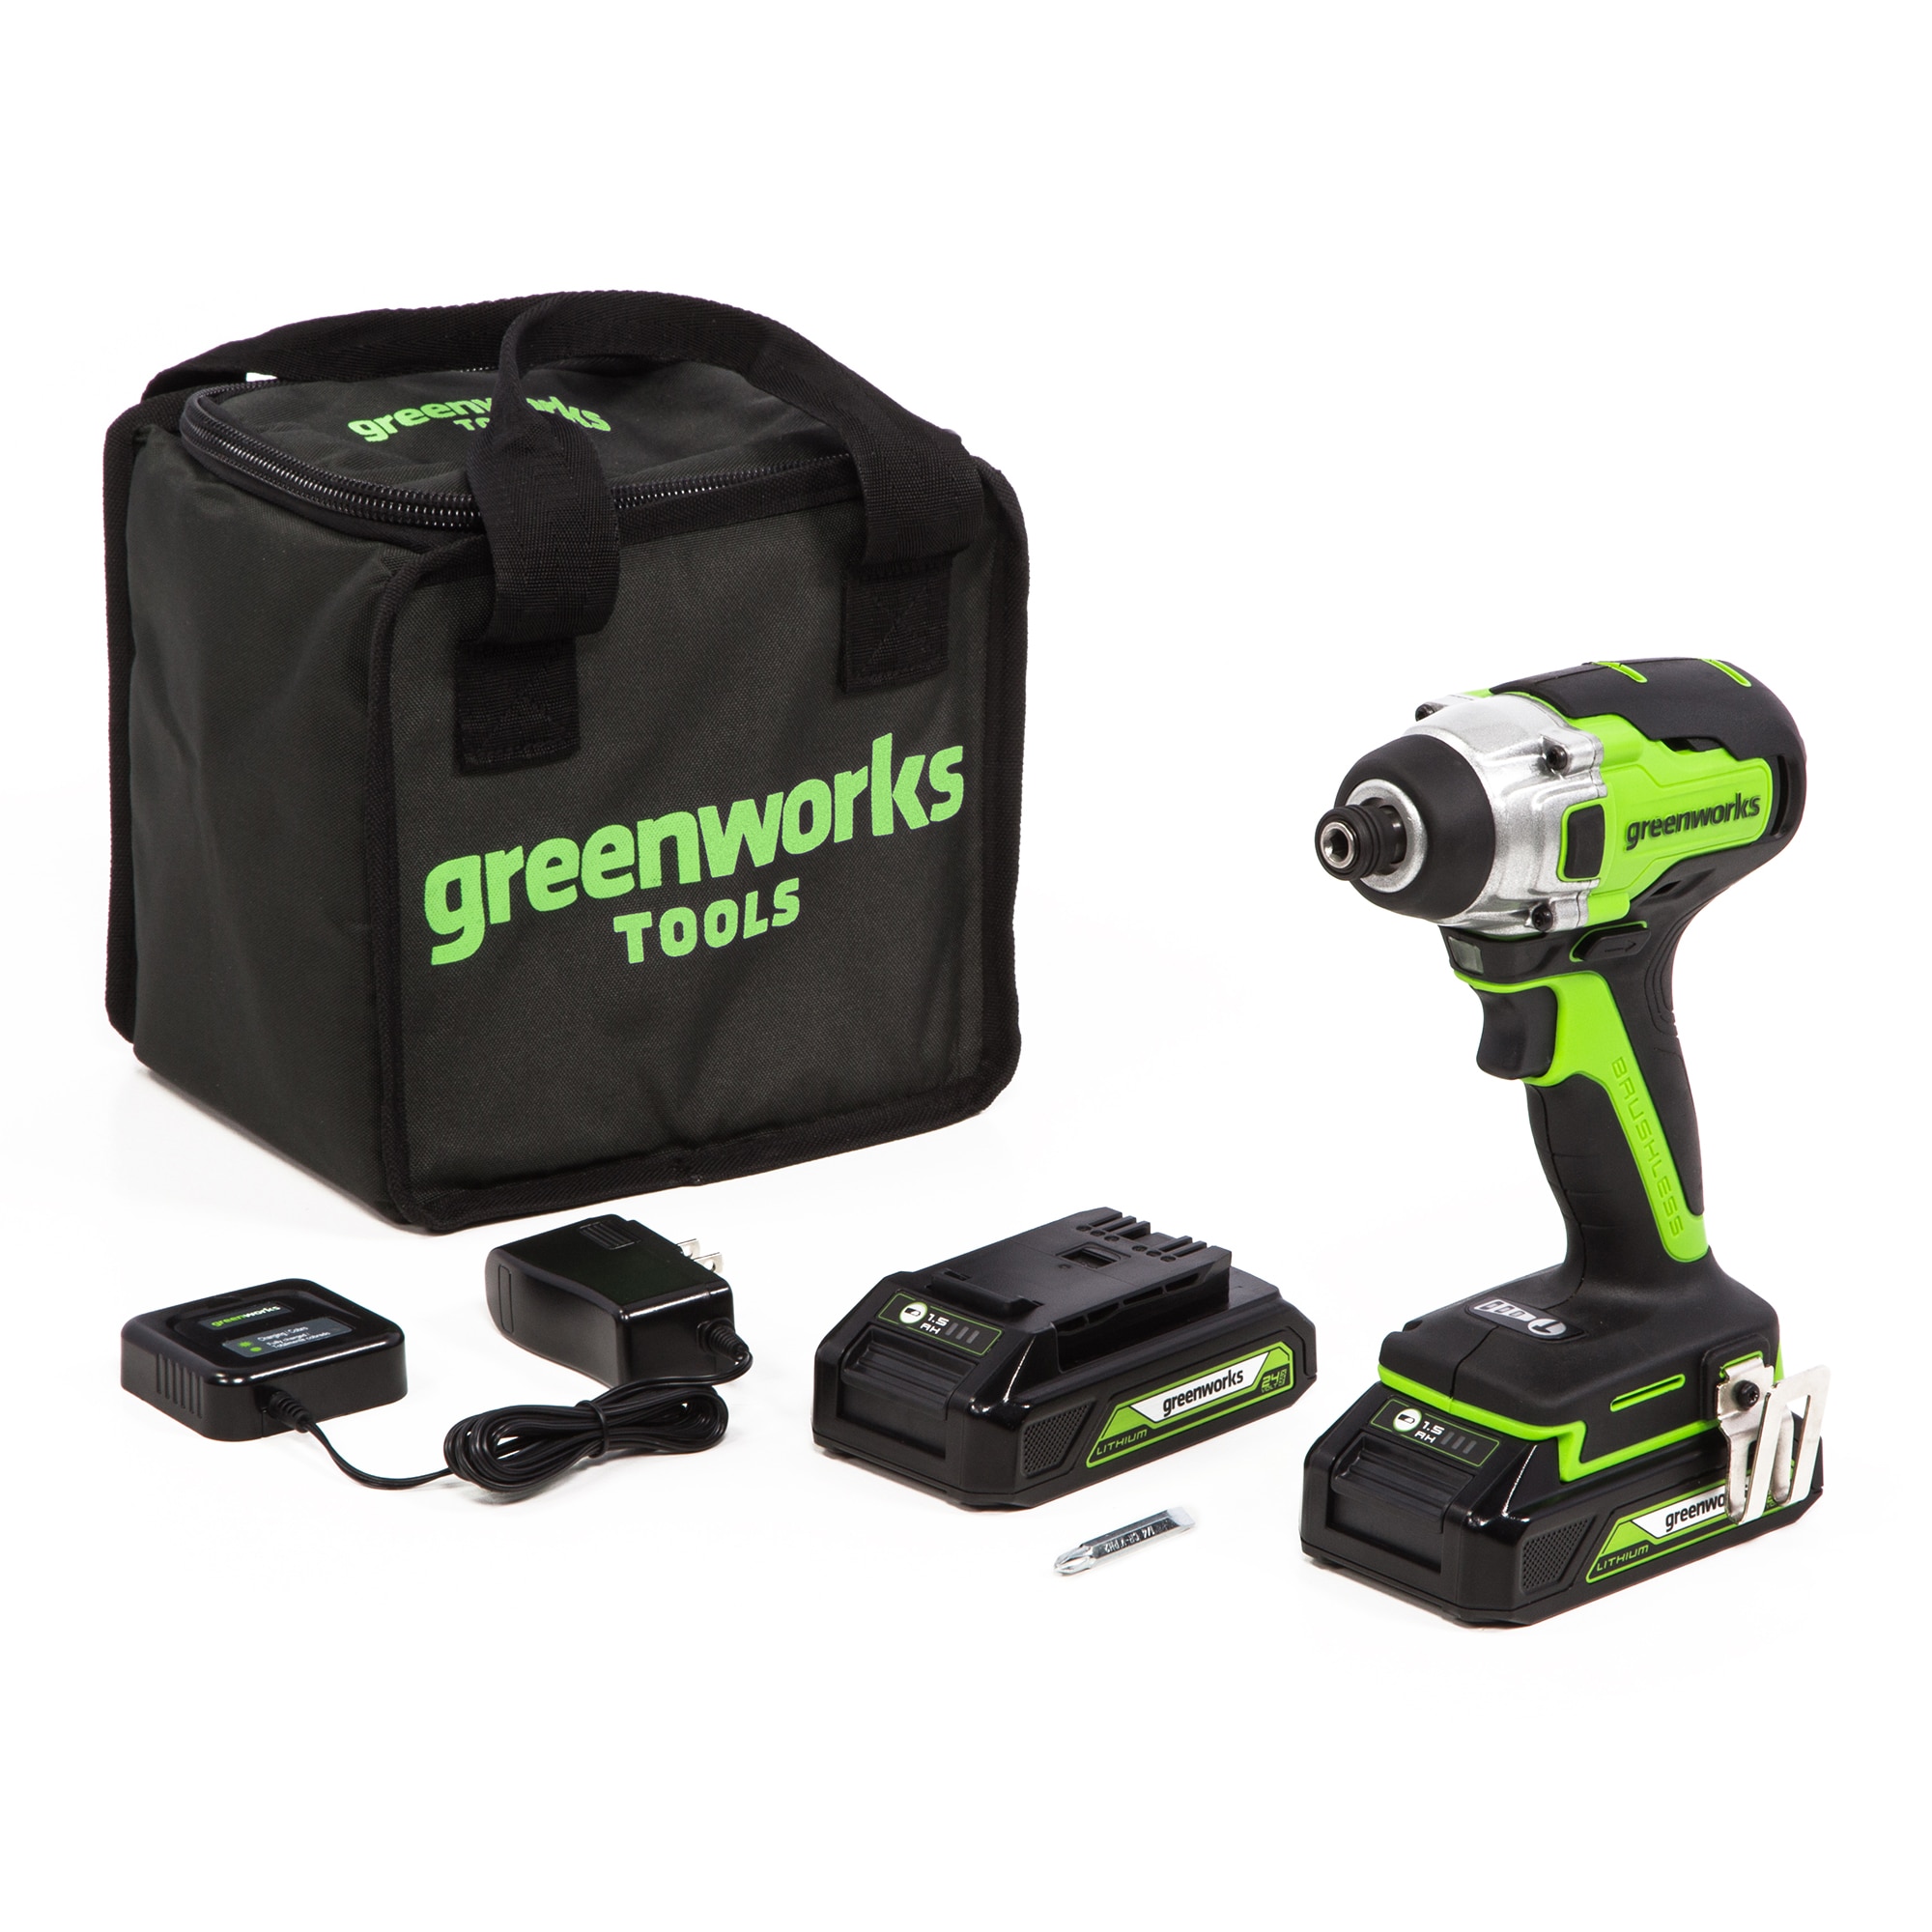 Greenworks 24-volt 1/4-in Brushless Cordless Impact Driver (2